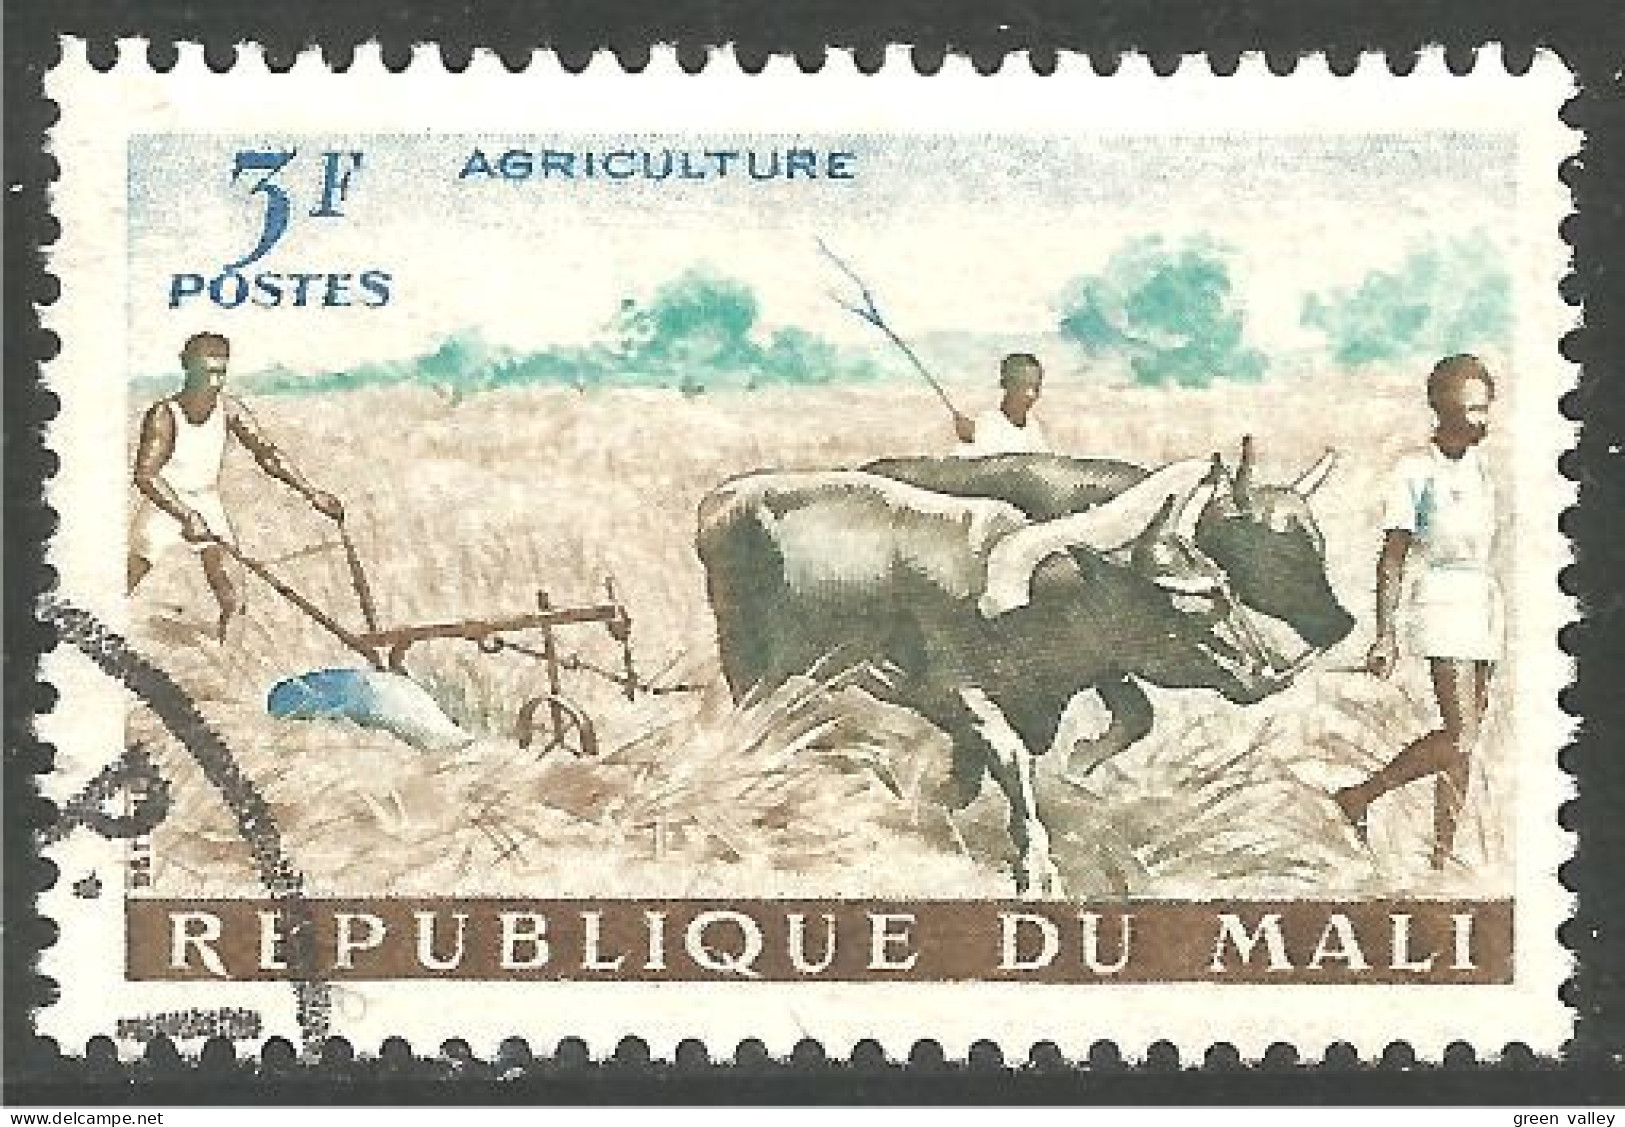 AF-61 Mali Agriculture Boeuf Ox Labour Plowing - Agriculture